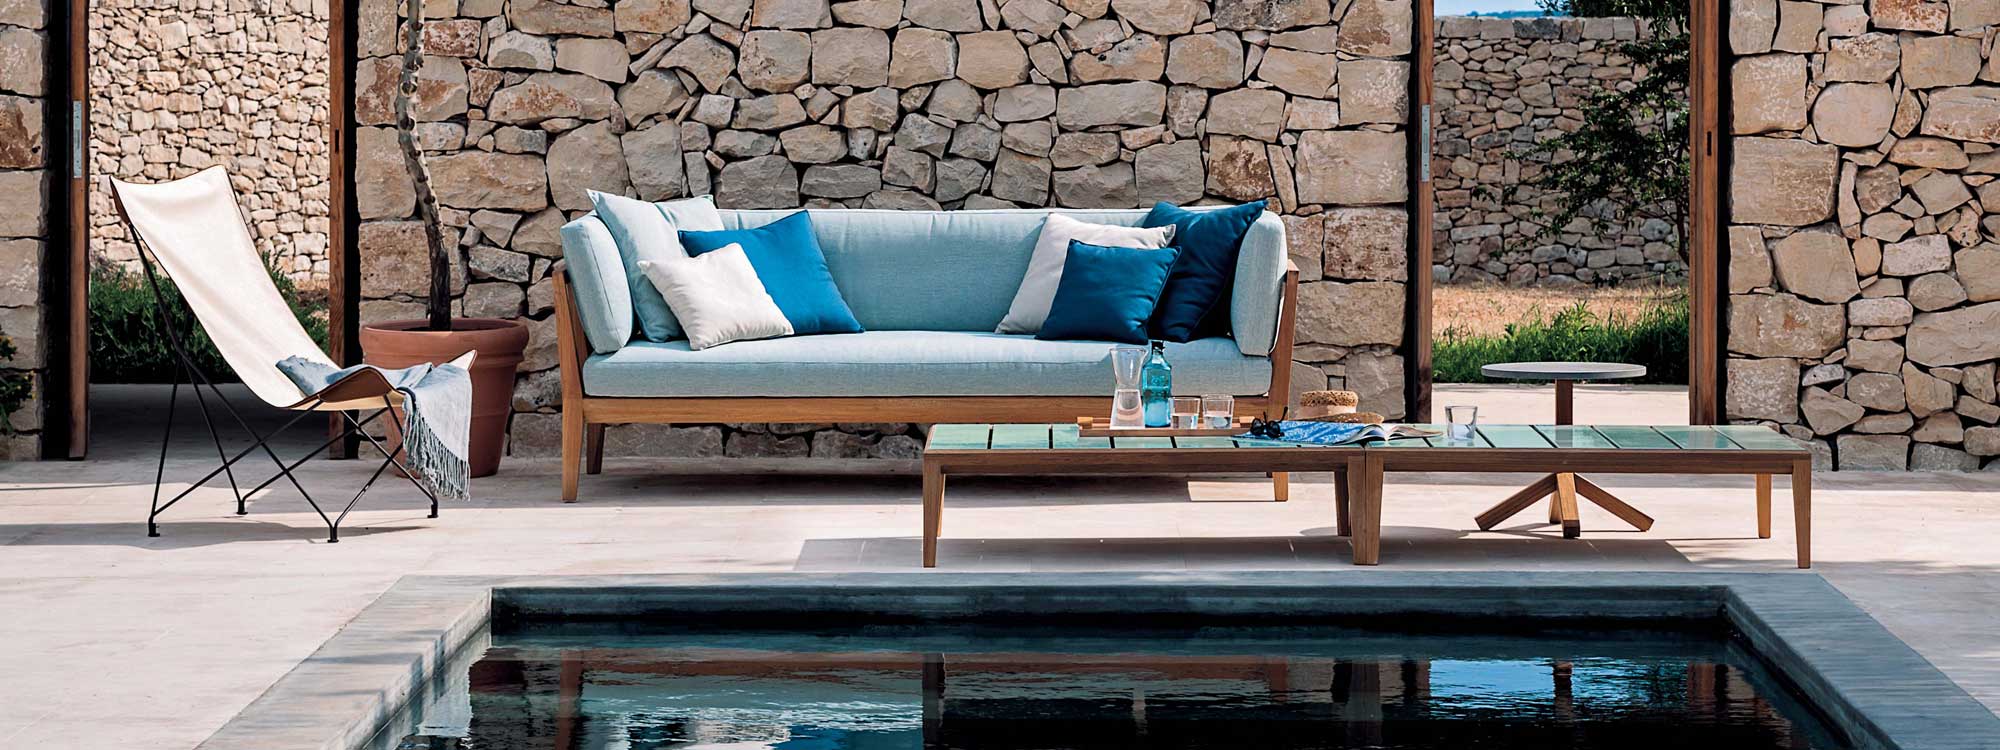 Image of RODA Teka 3 seat teak sofa with light blue cushions, together with Teka teak low table with glazed ceramic top, shown next to tranquil water feature with drystone wall in background